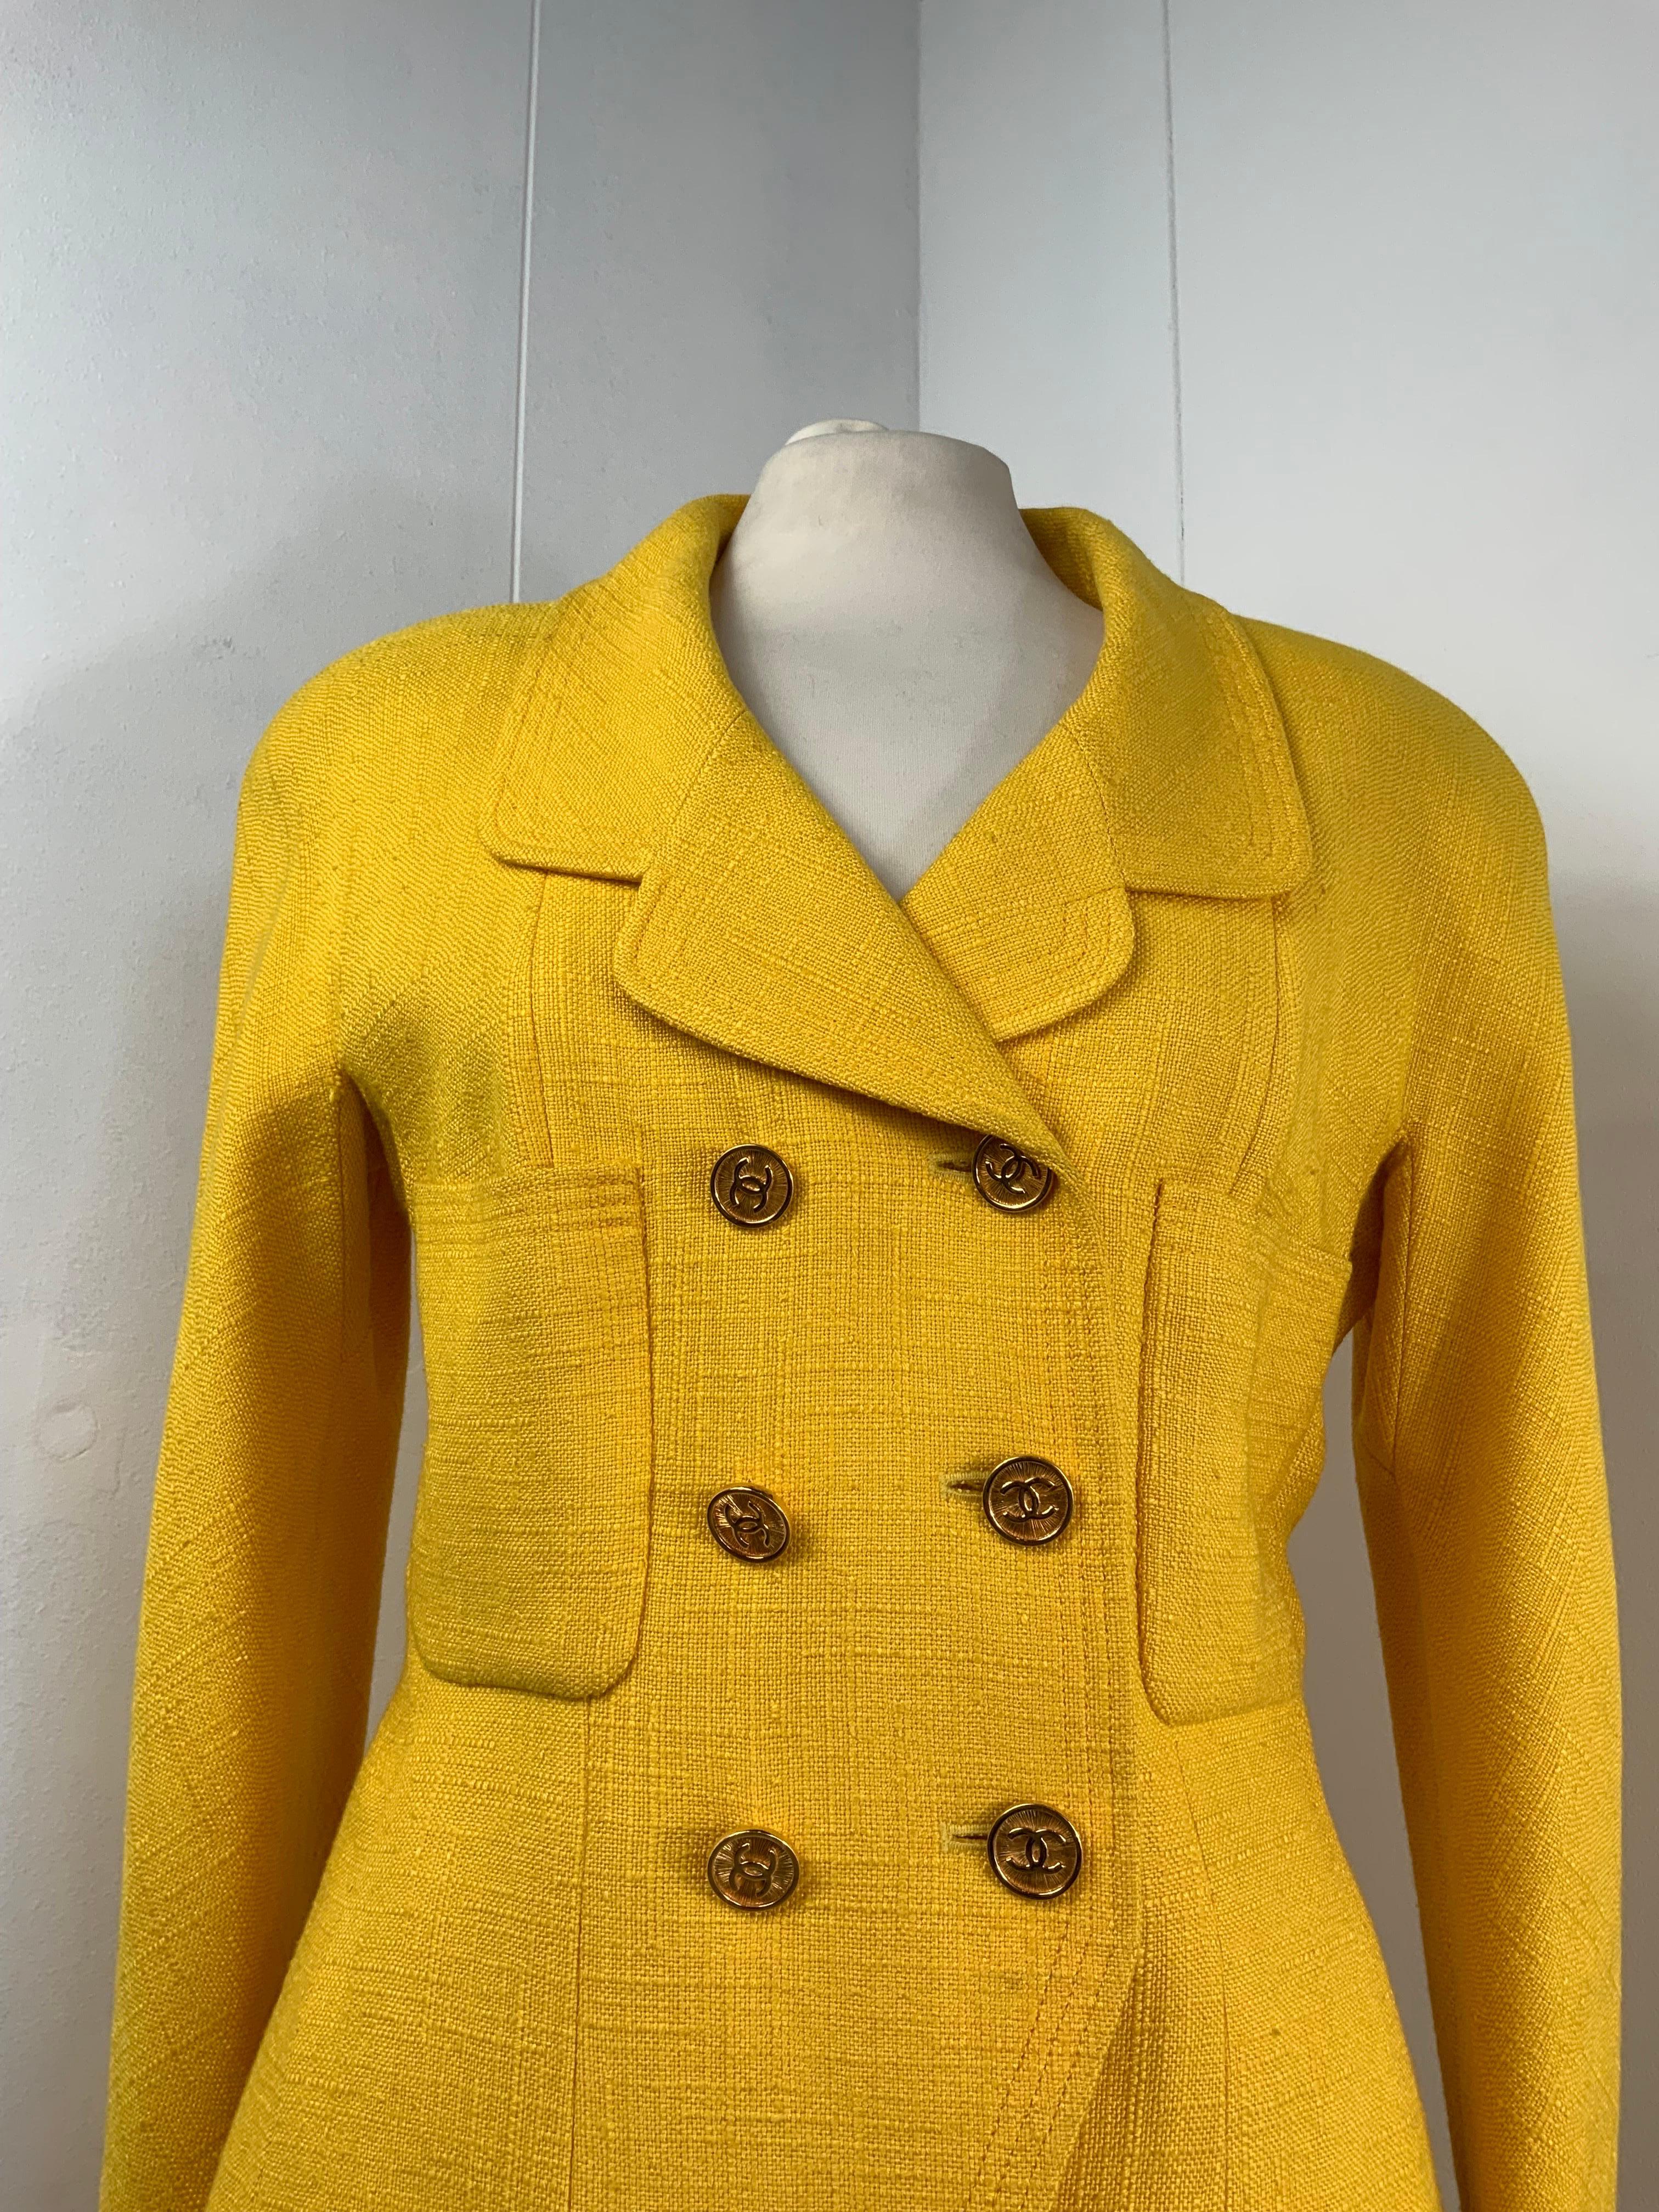 Chanel vintage suit.
Jacket + skirt.
Featuring viscose and linen fabrics.
Silk fully lined.
Golden and branded buttons.
Size 42.
Shoulders 44 cm
Bust 42 cm
Length 66
Sleeves 52 cm
Skirt has a posterior zip closure.
Waist 35 cm
Length 53 cm